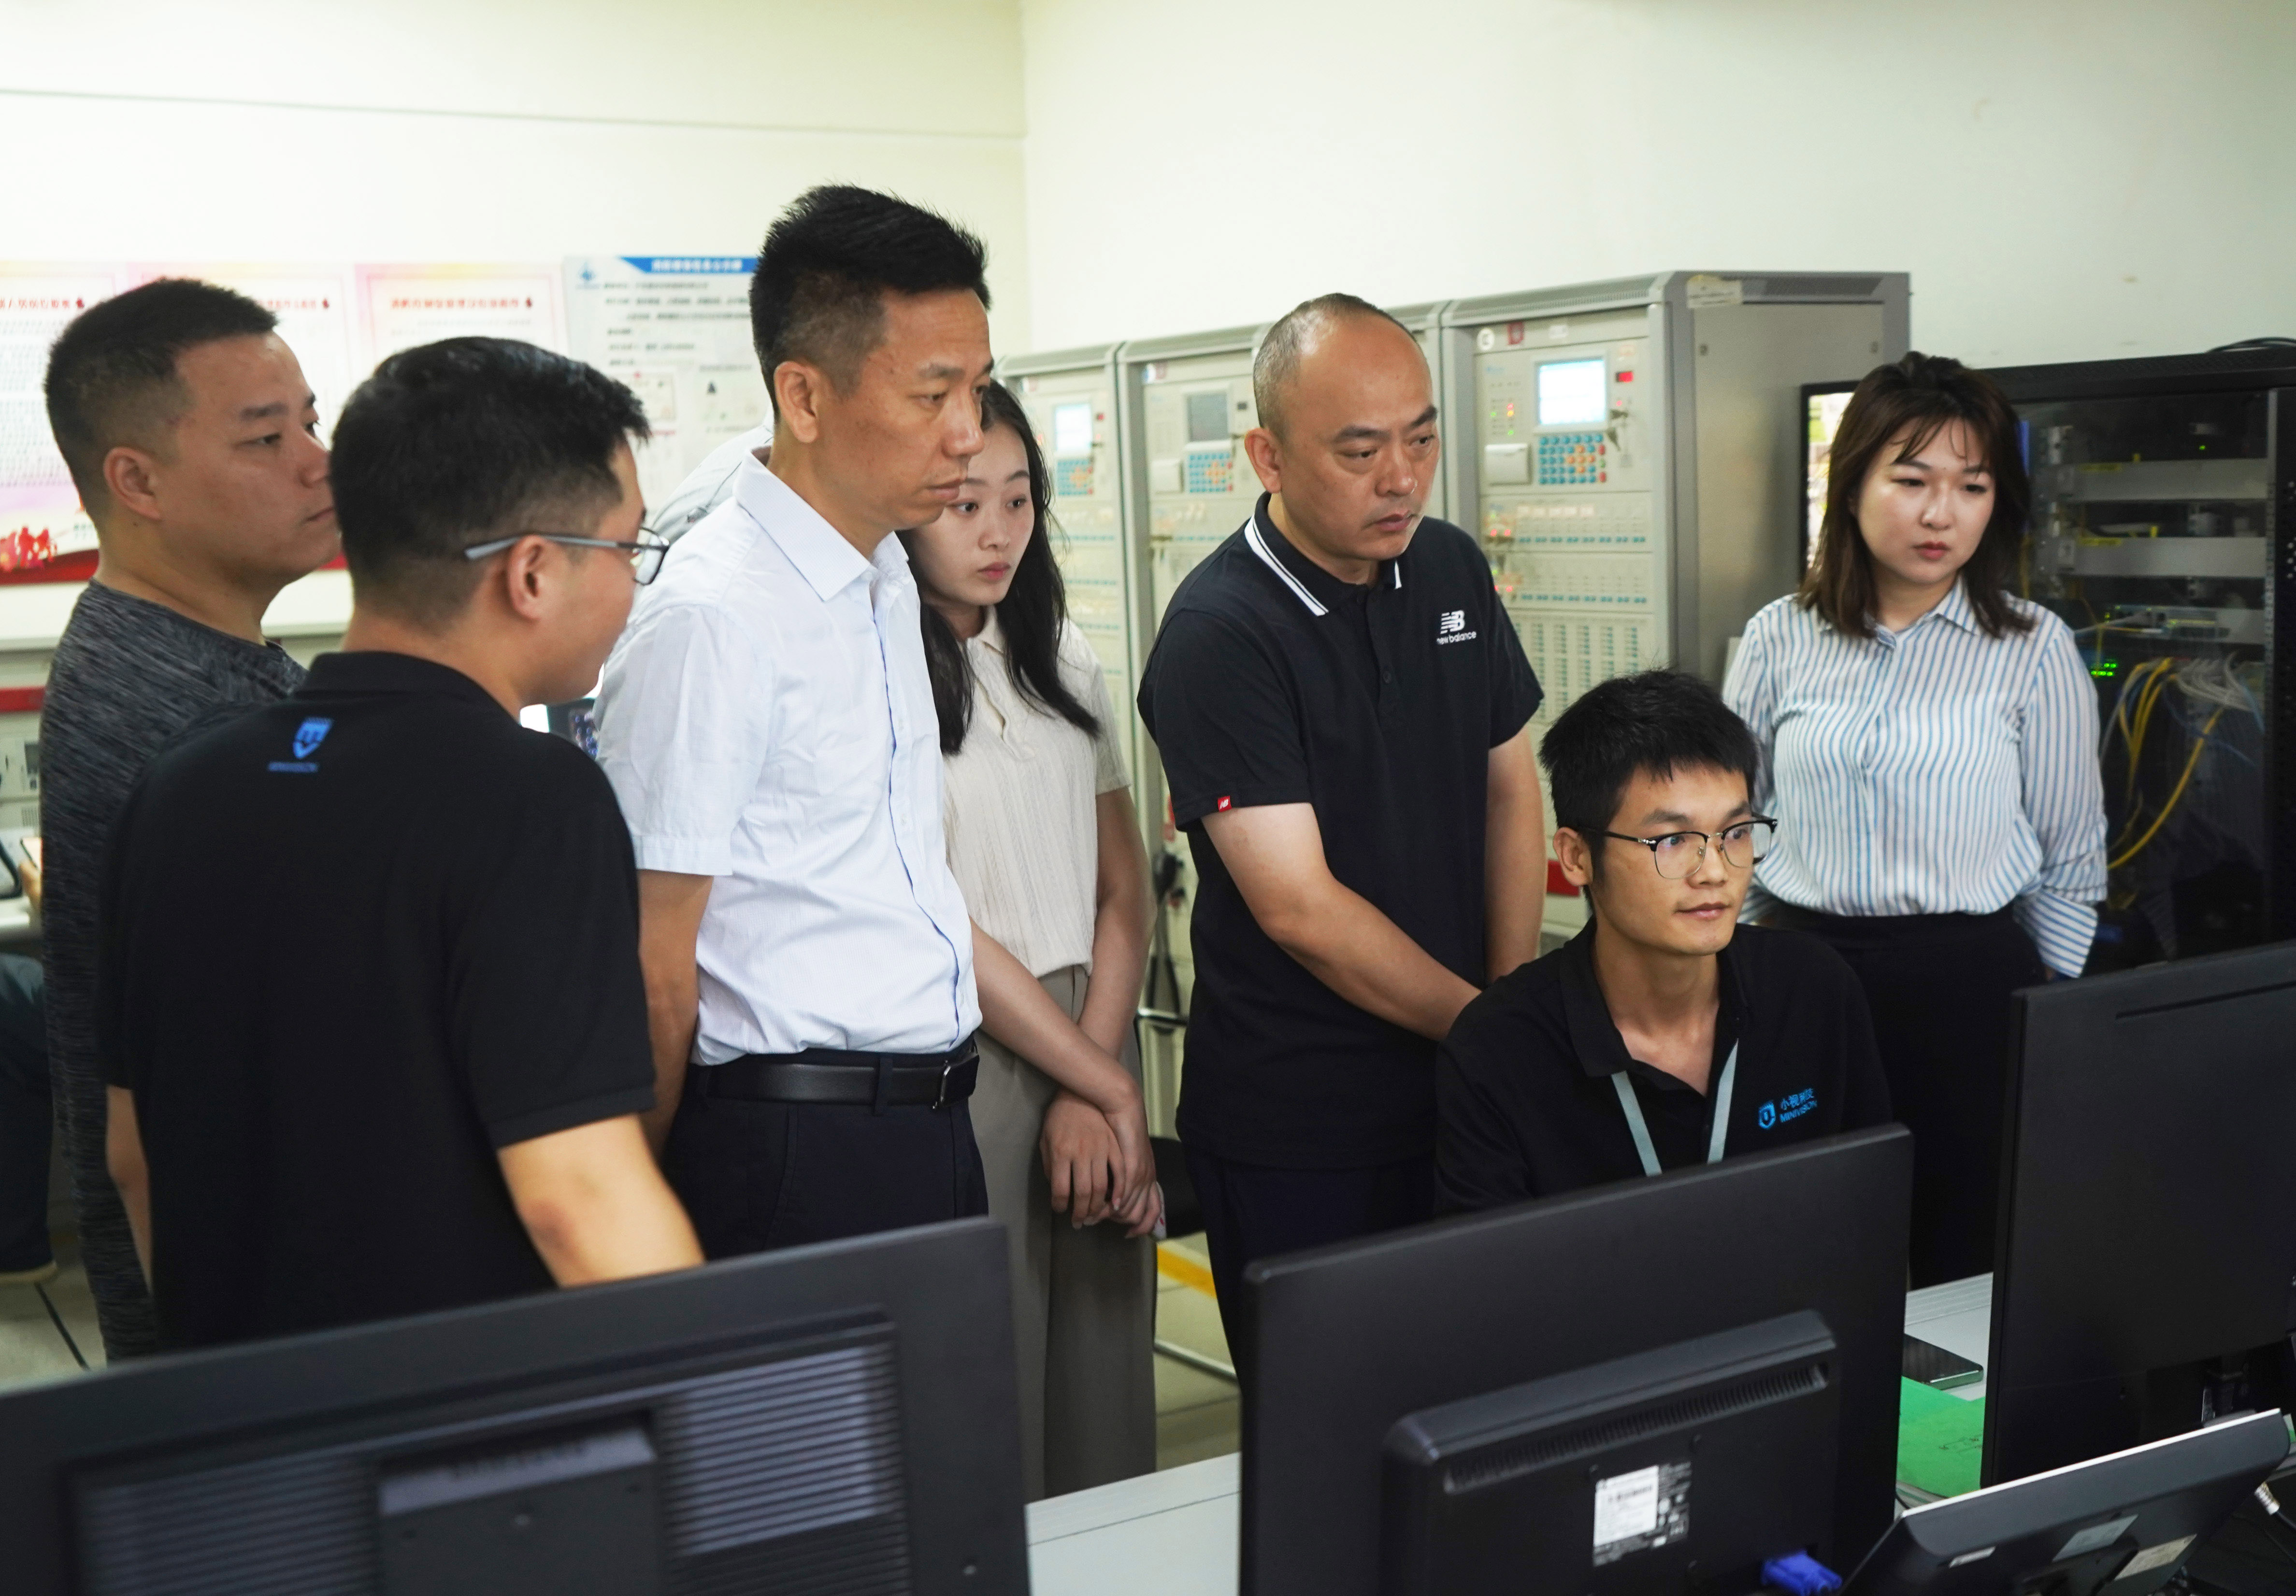 Jiangxi Ganjiang New Area Inspection Team Visits Minivision Technology to Investigate the Construction of Smart Communities